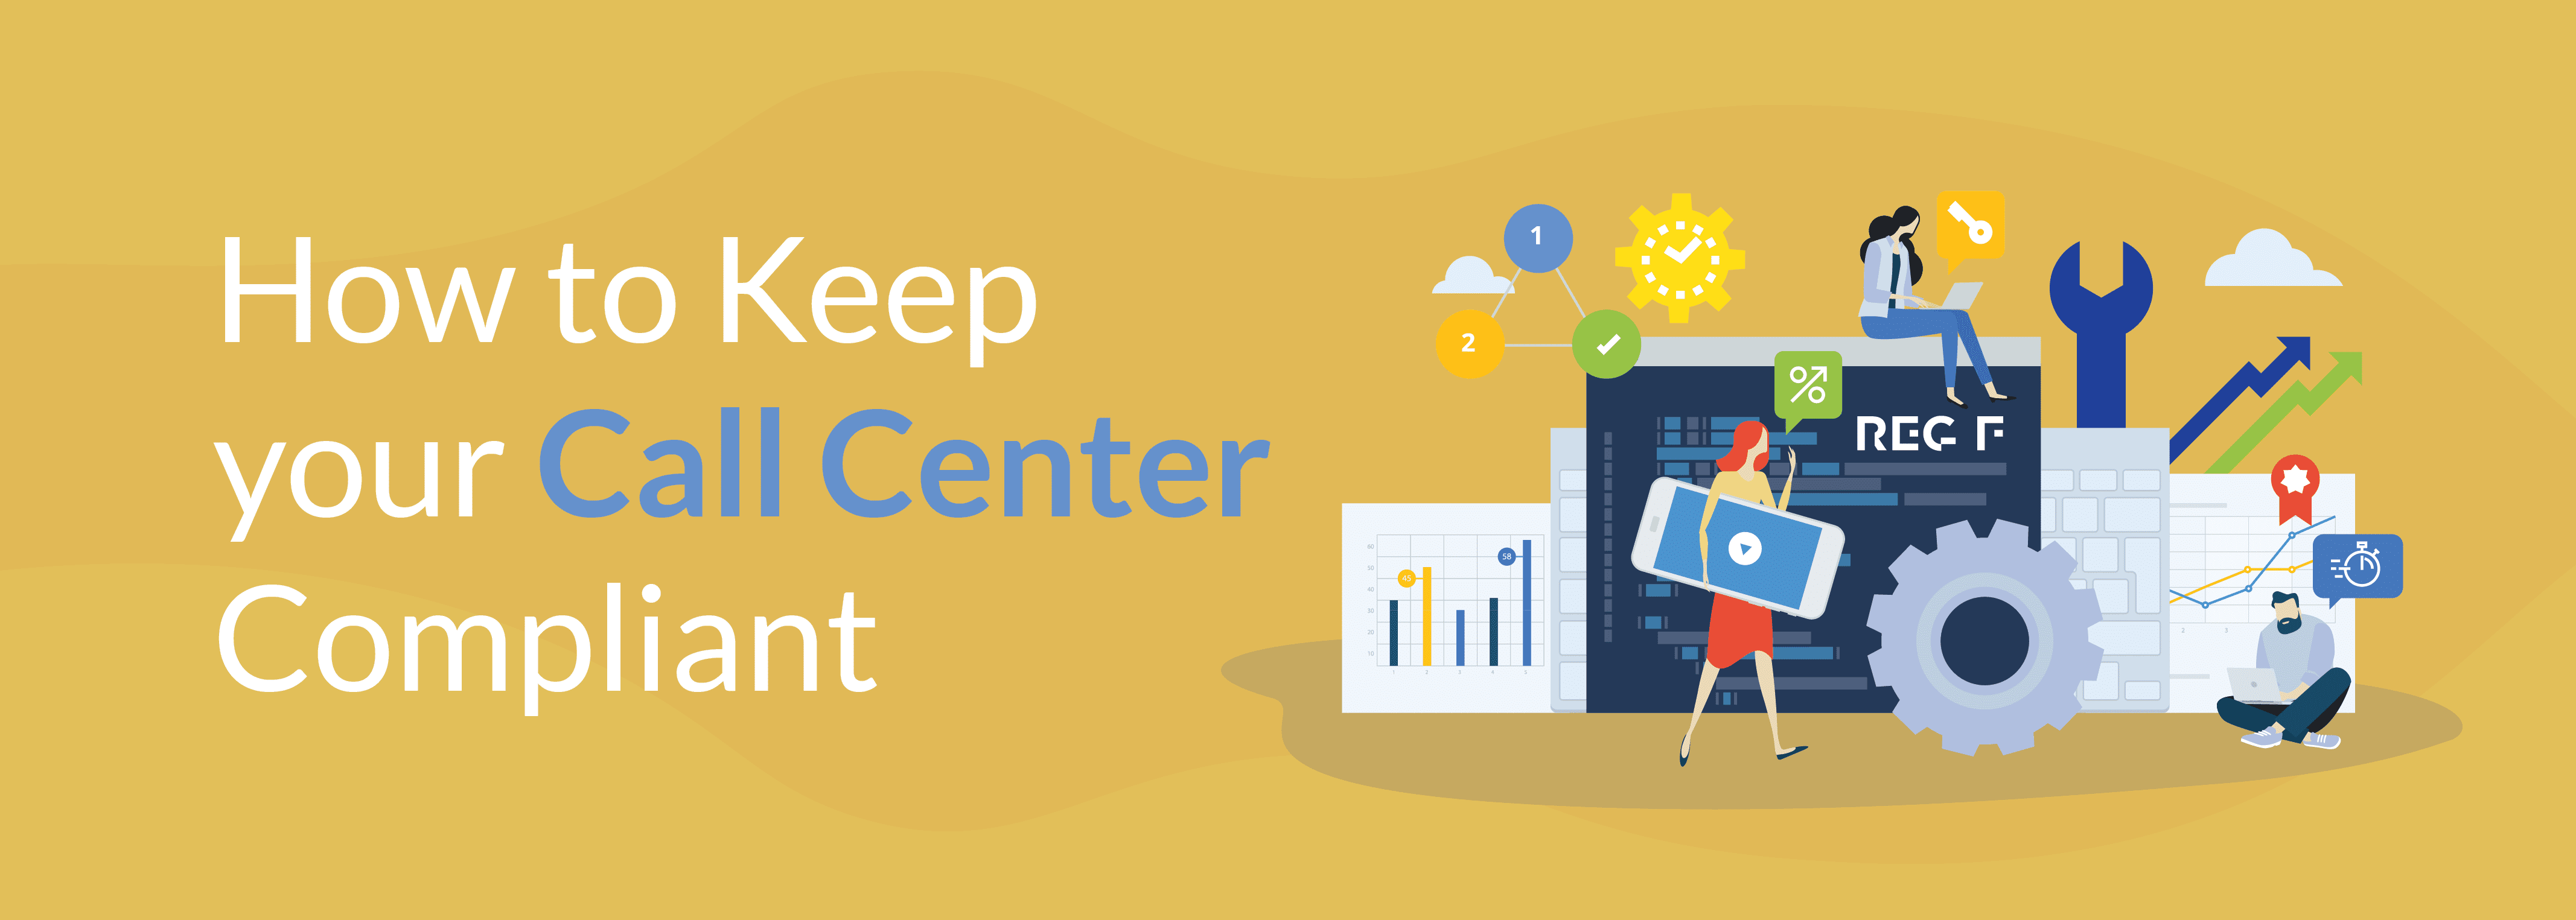 How to Keep your Call Center Compliant